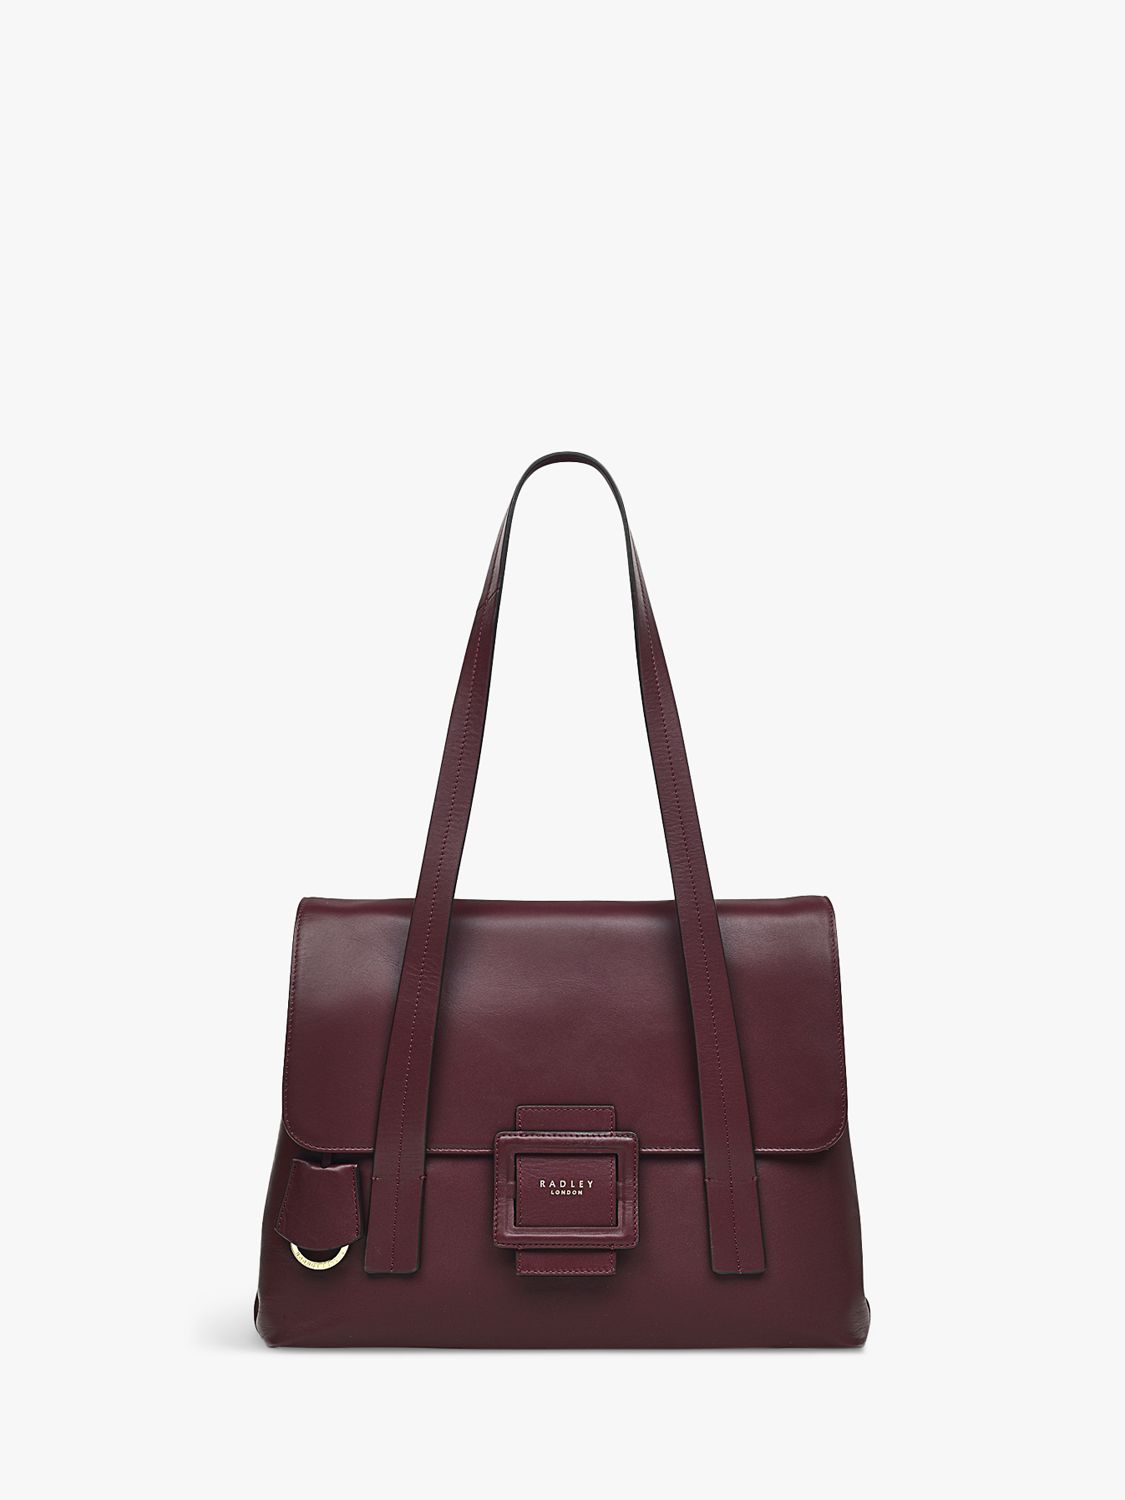 Radley Purley Knoll Large Flapover Leather Shoulder Bag, Dark Cherry at ...